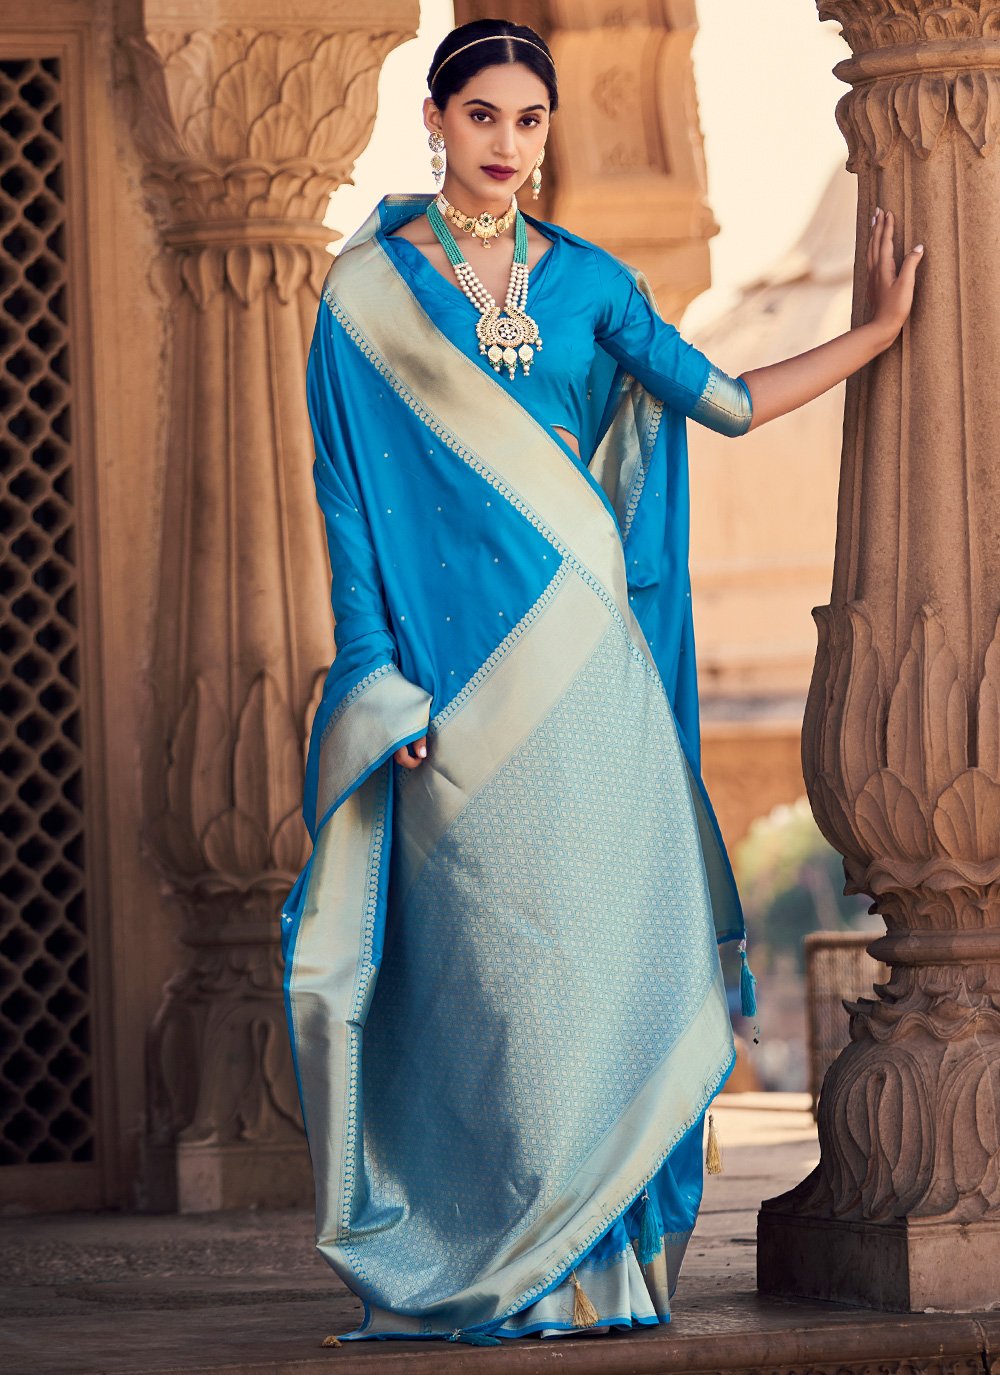 Buy Grancy Firozi Ready To Wear Stylish Saree with Stiched Designer Blouse  at